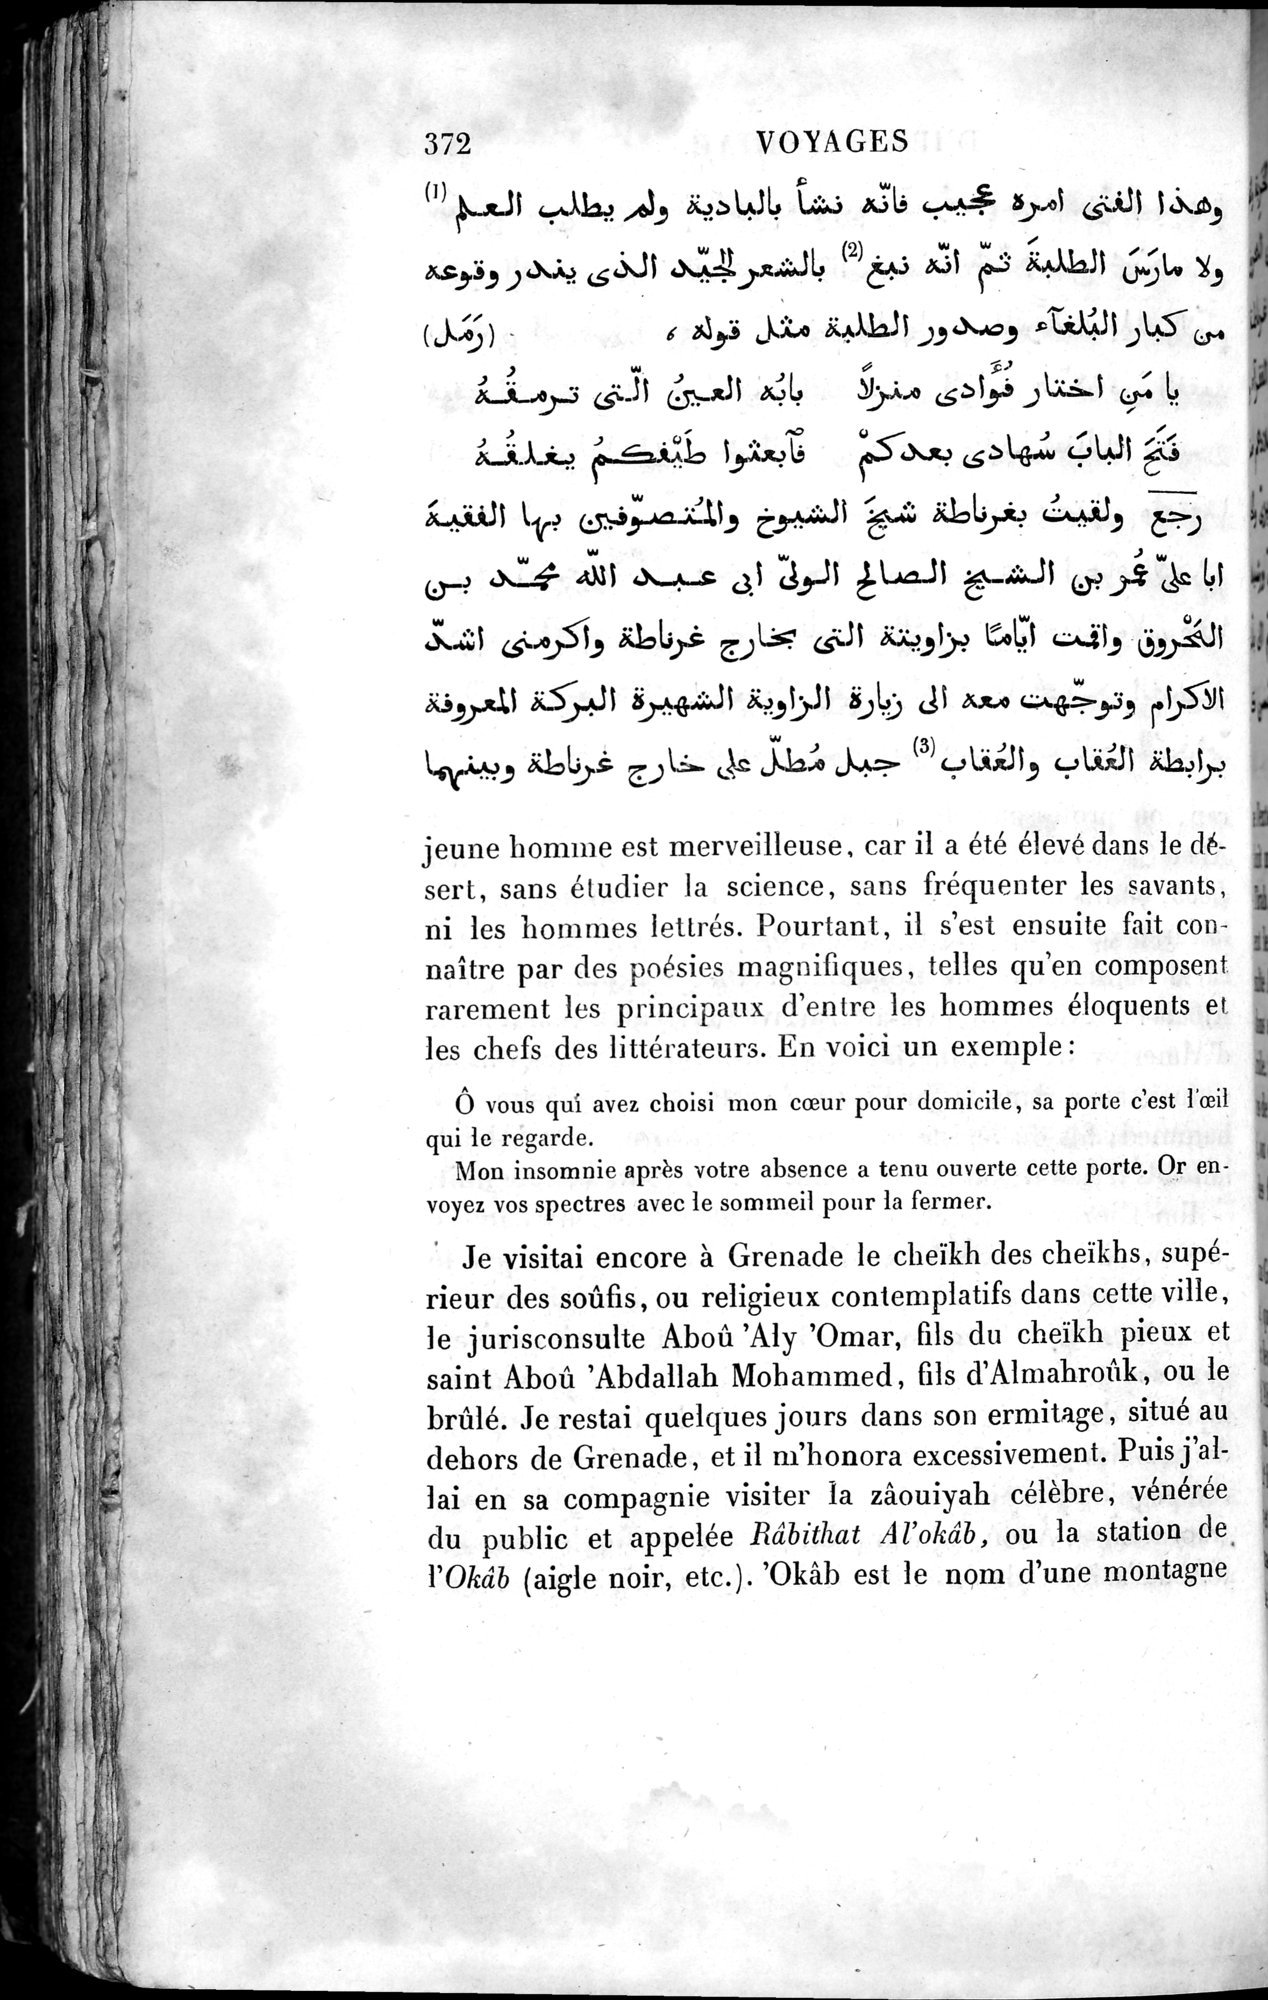 Voyages d'Ibn Batoutah : vol.4 / Page 384 (Grayscale High Resolution Image)